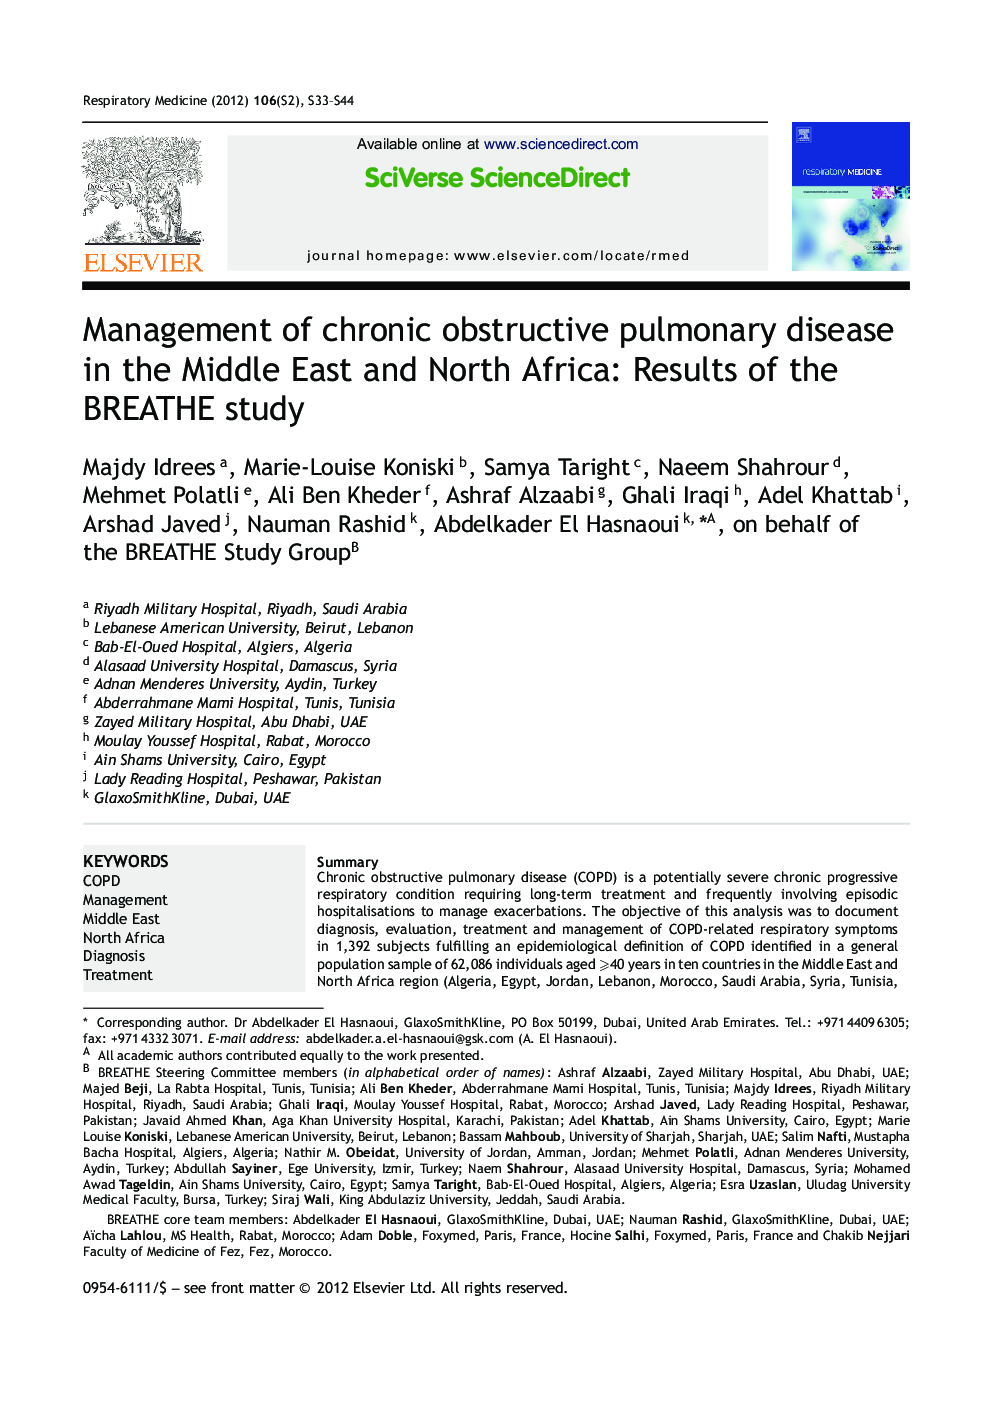 Management of chronic obstructive pulmonary disease in the Middle East and North Africa: Results of the BREATHE study 